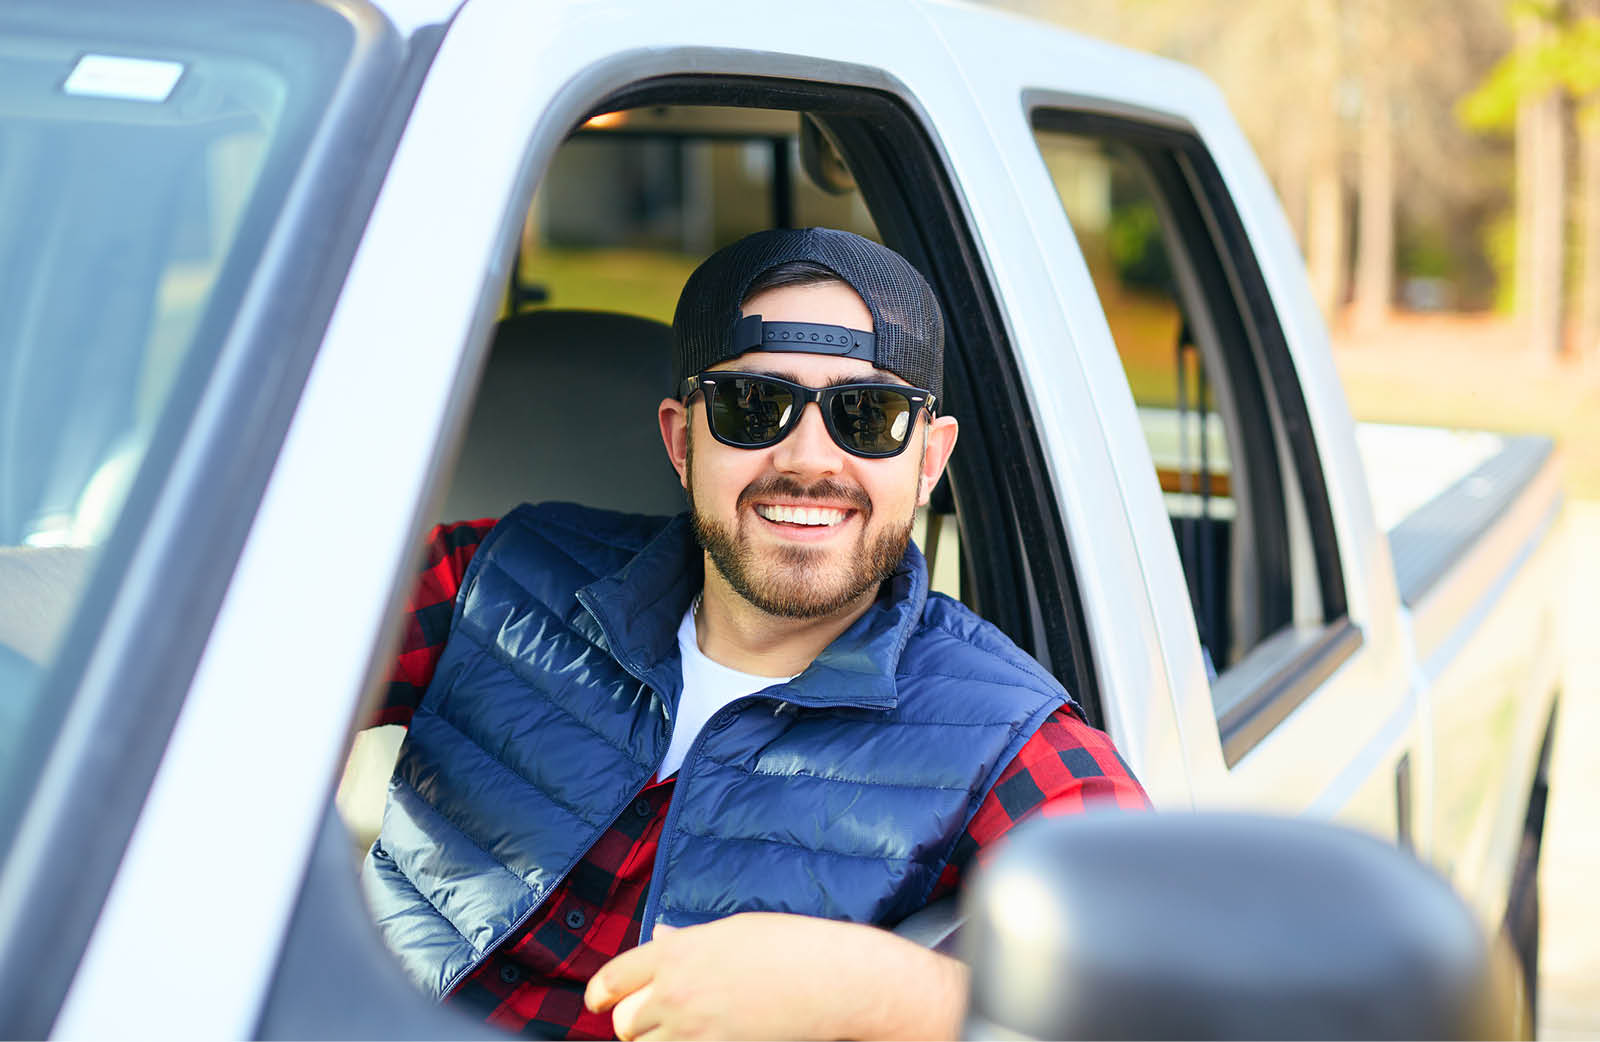 Image of a man in a truck smiling with sunglasses on